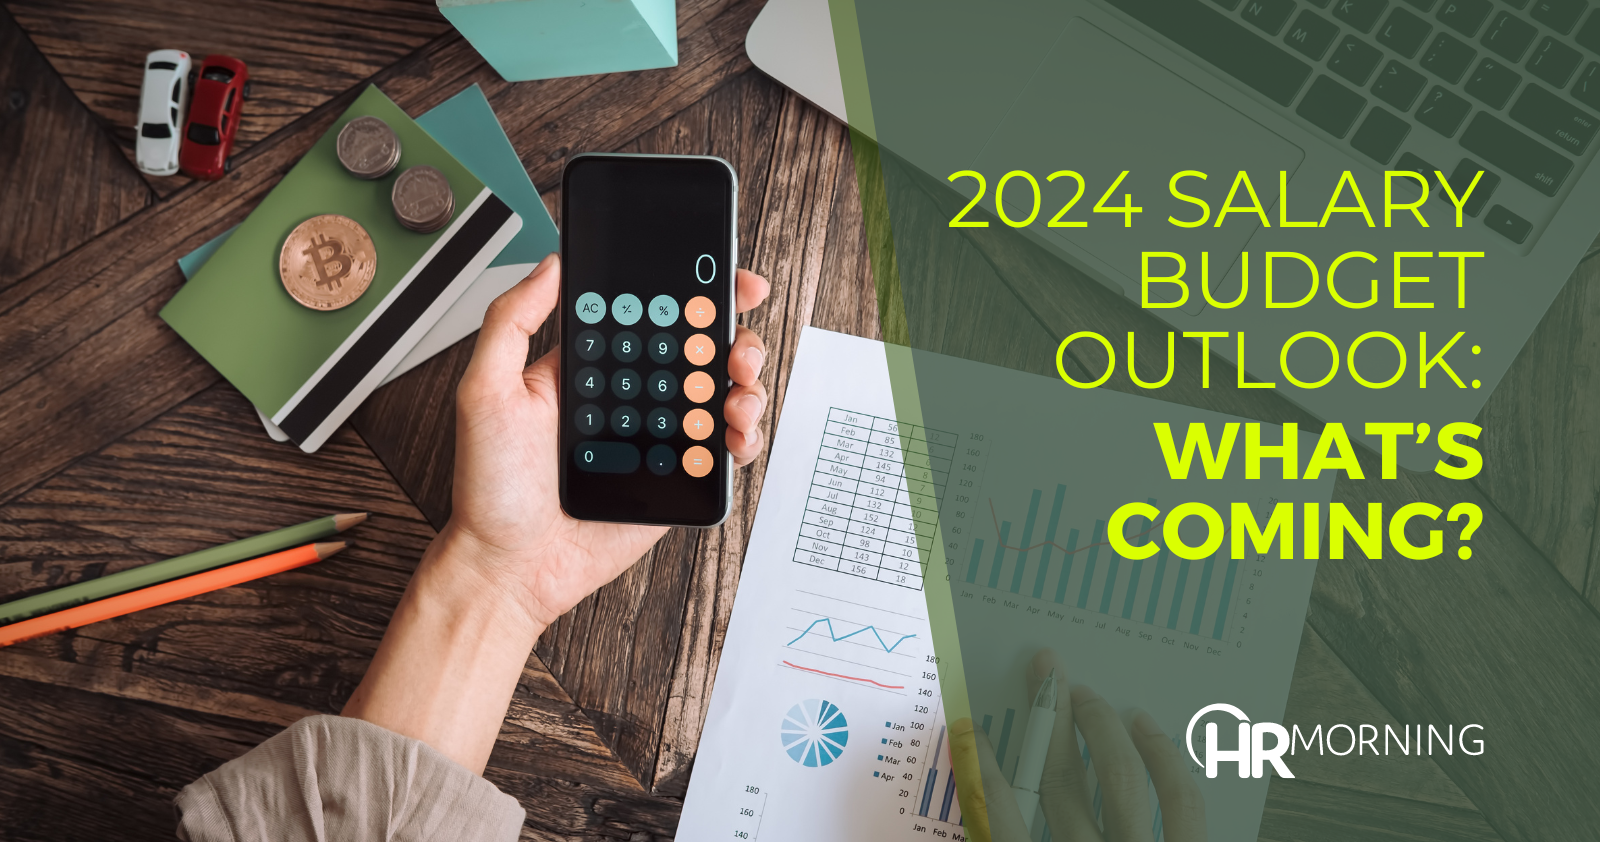 2024 salary budget outlook: What’s coming?